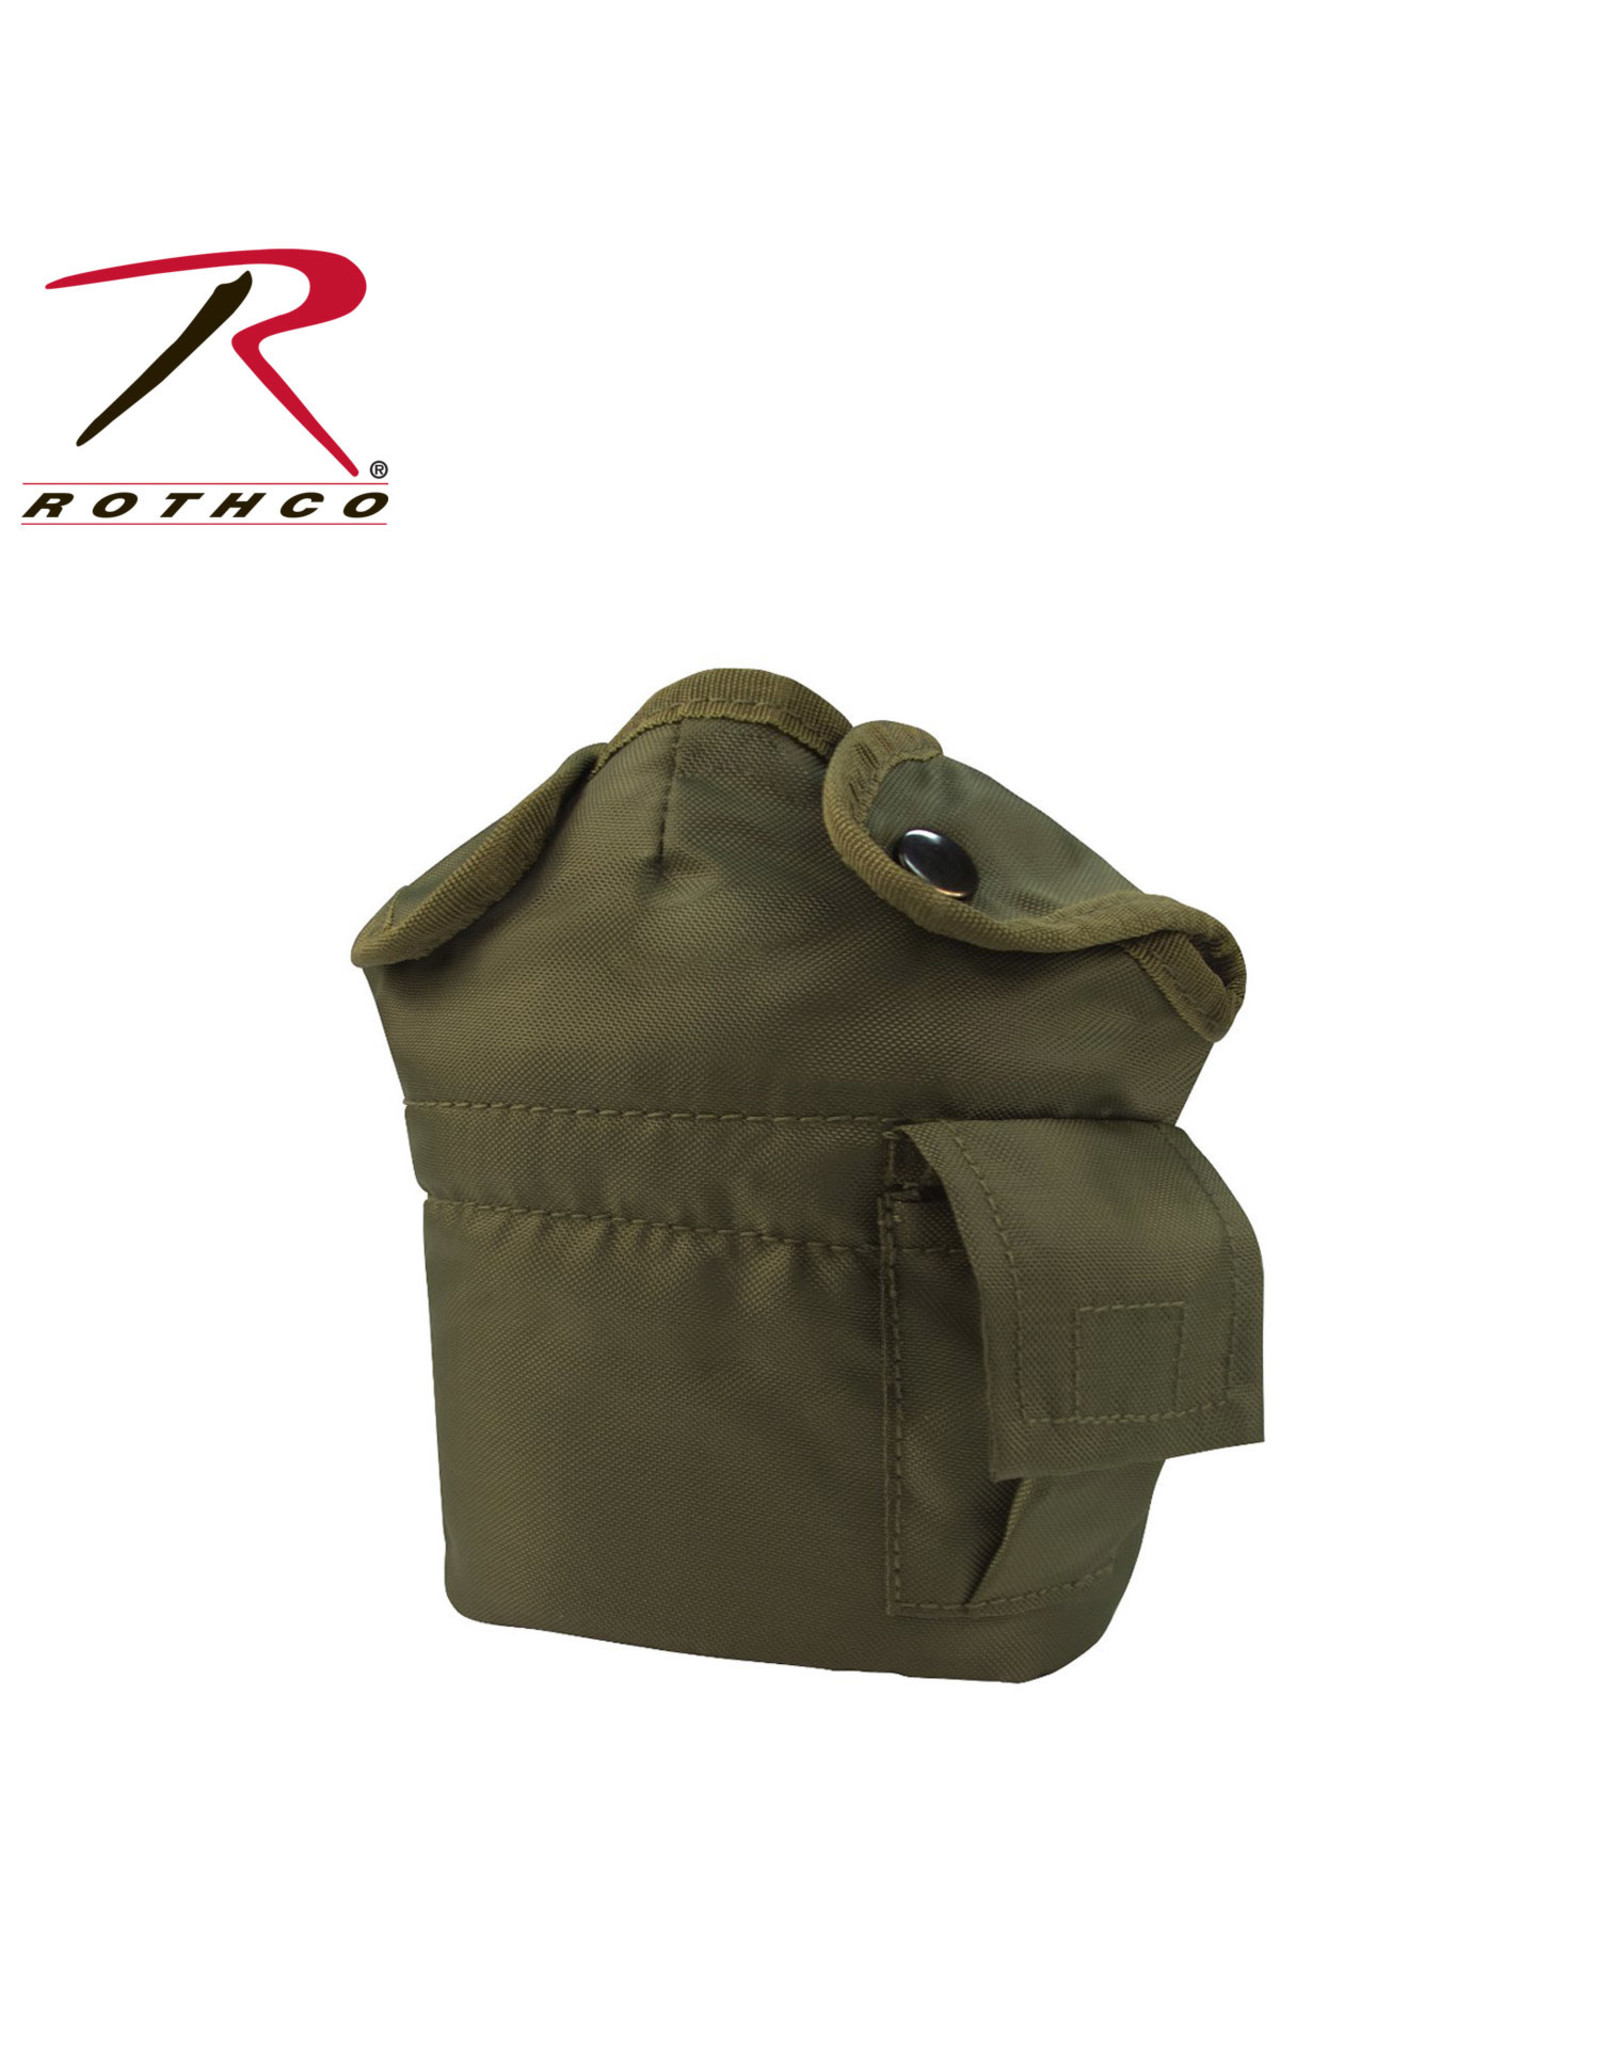 Rothco 1 QT Canteen Cover - Alice